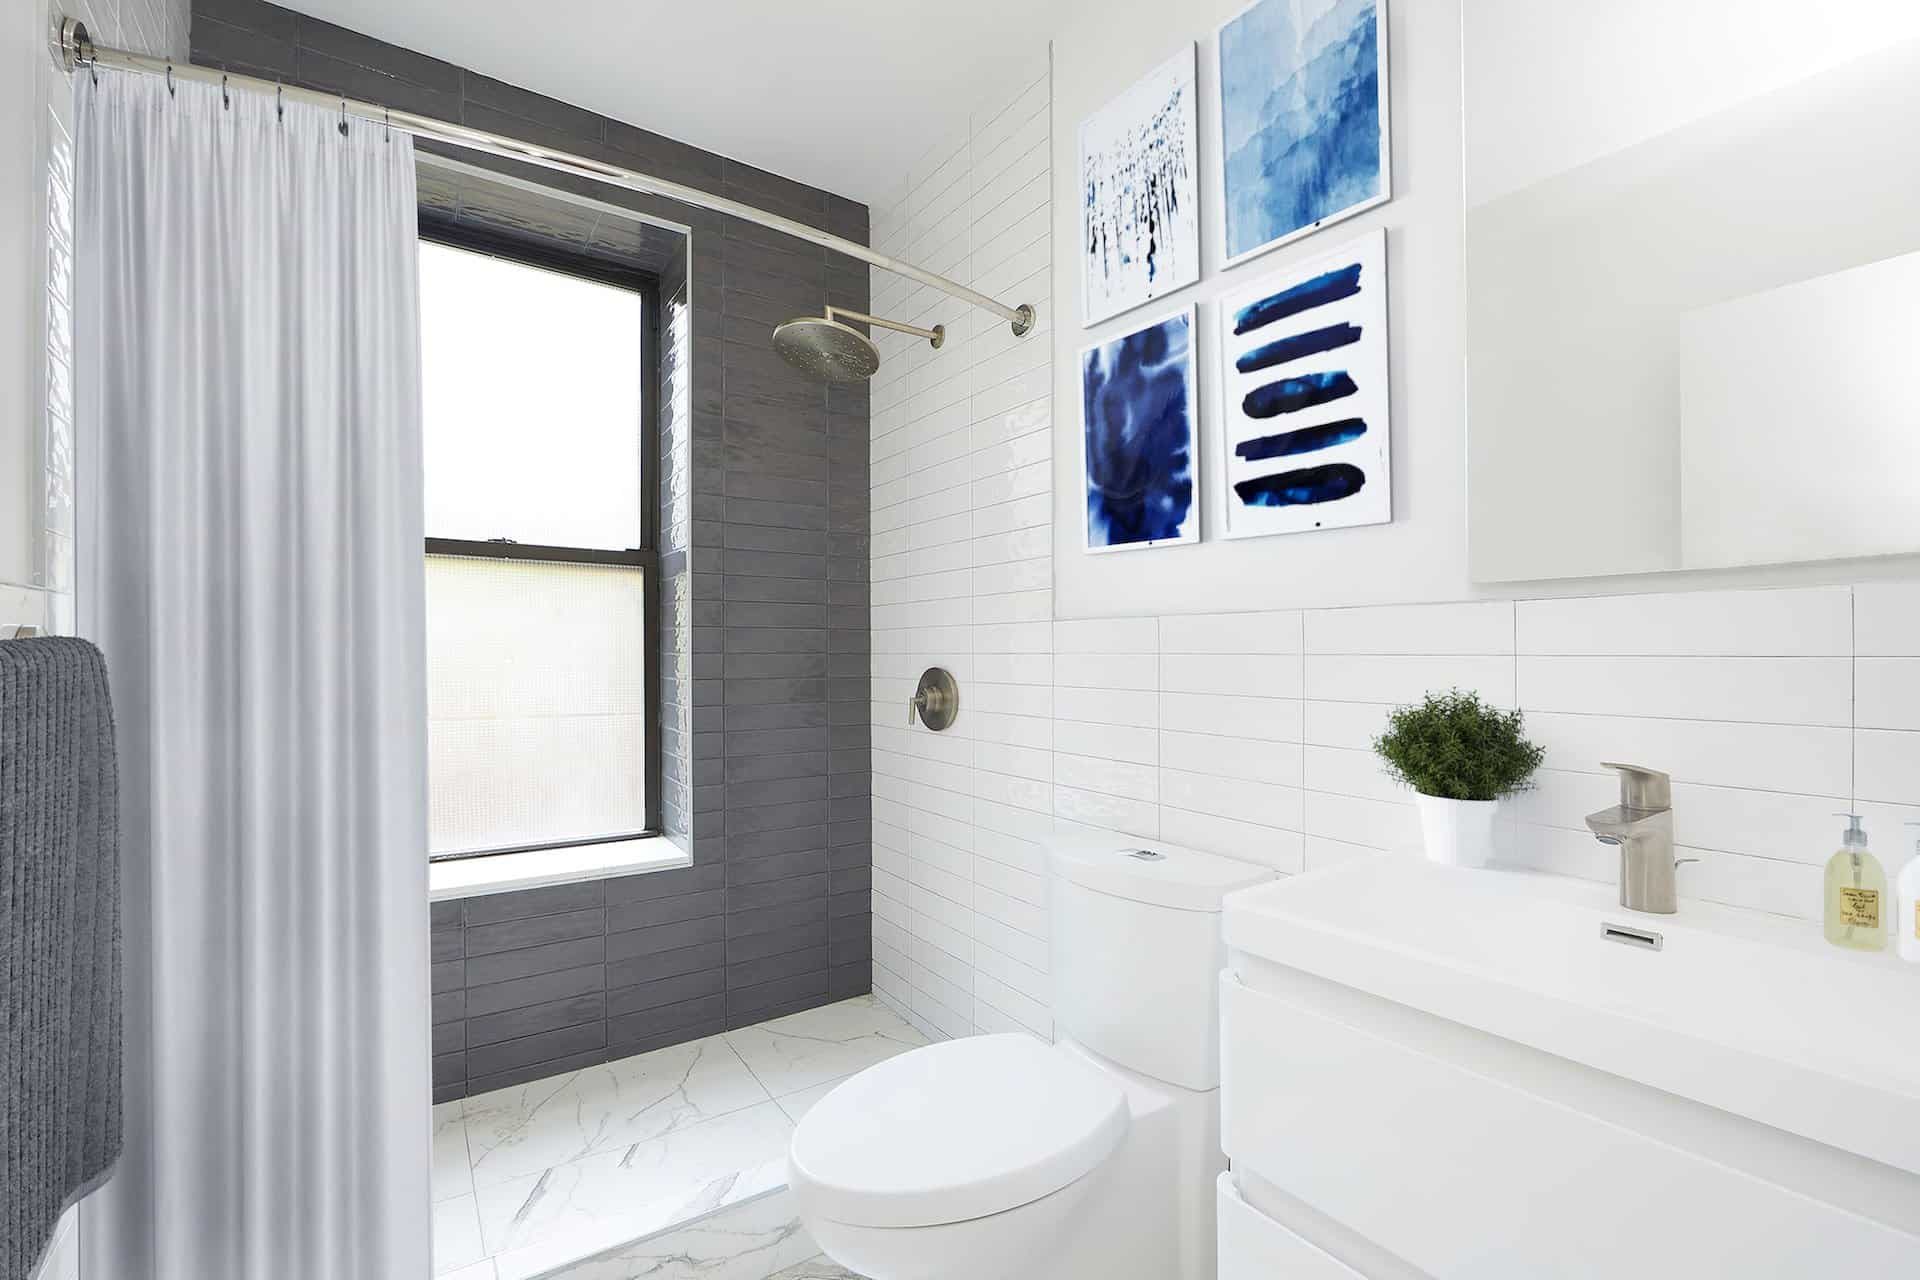 Bathroom at 112-116 Avenue C apartments in New York with white tile walls, single vanity, standing shower and a large window.